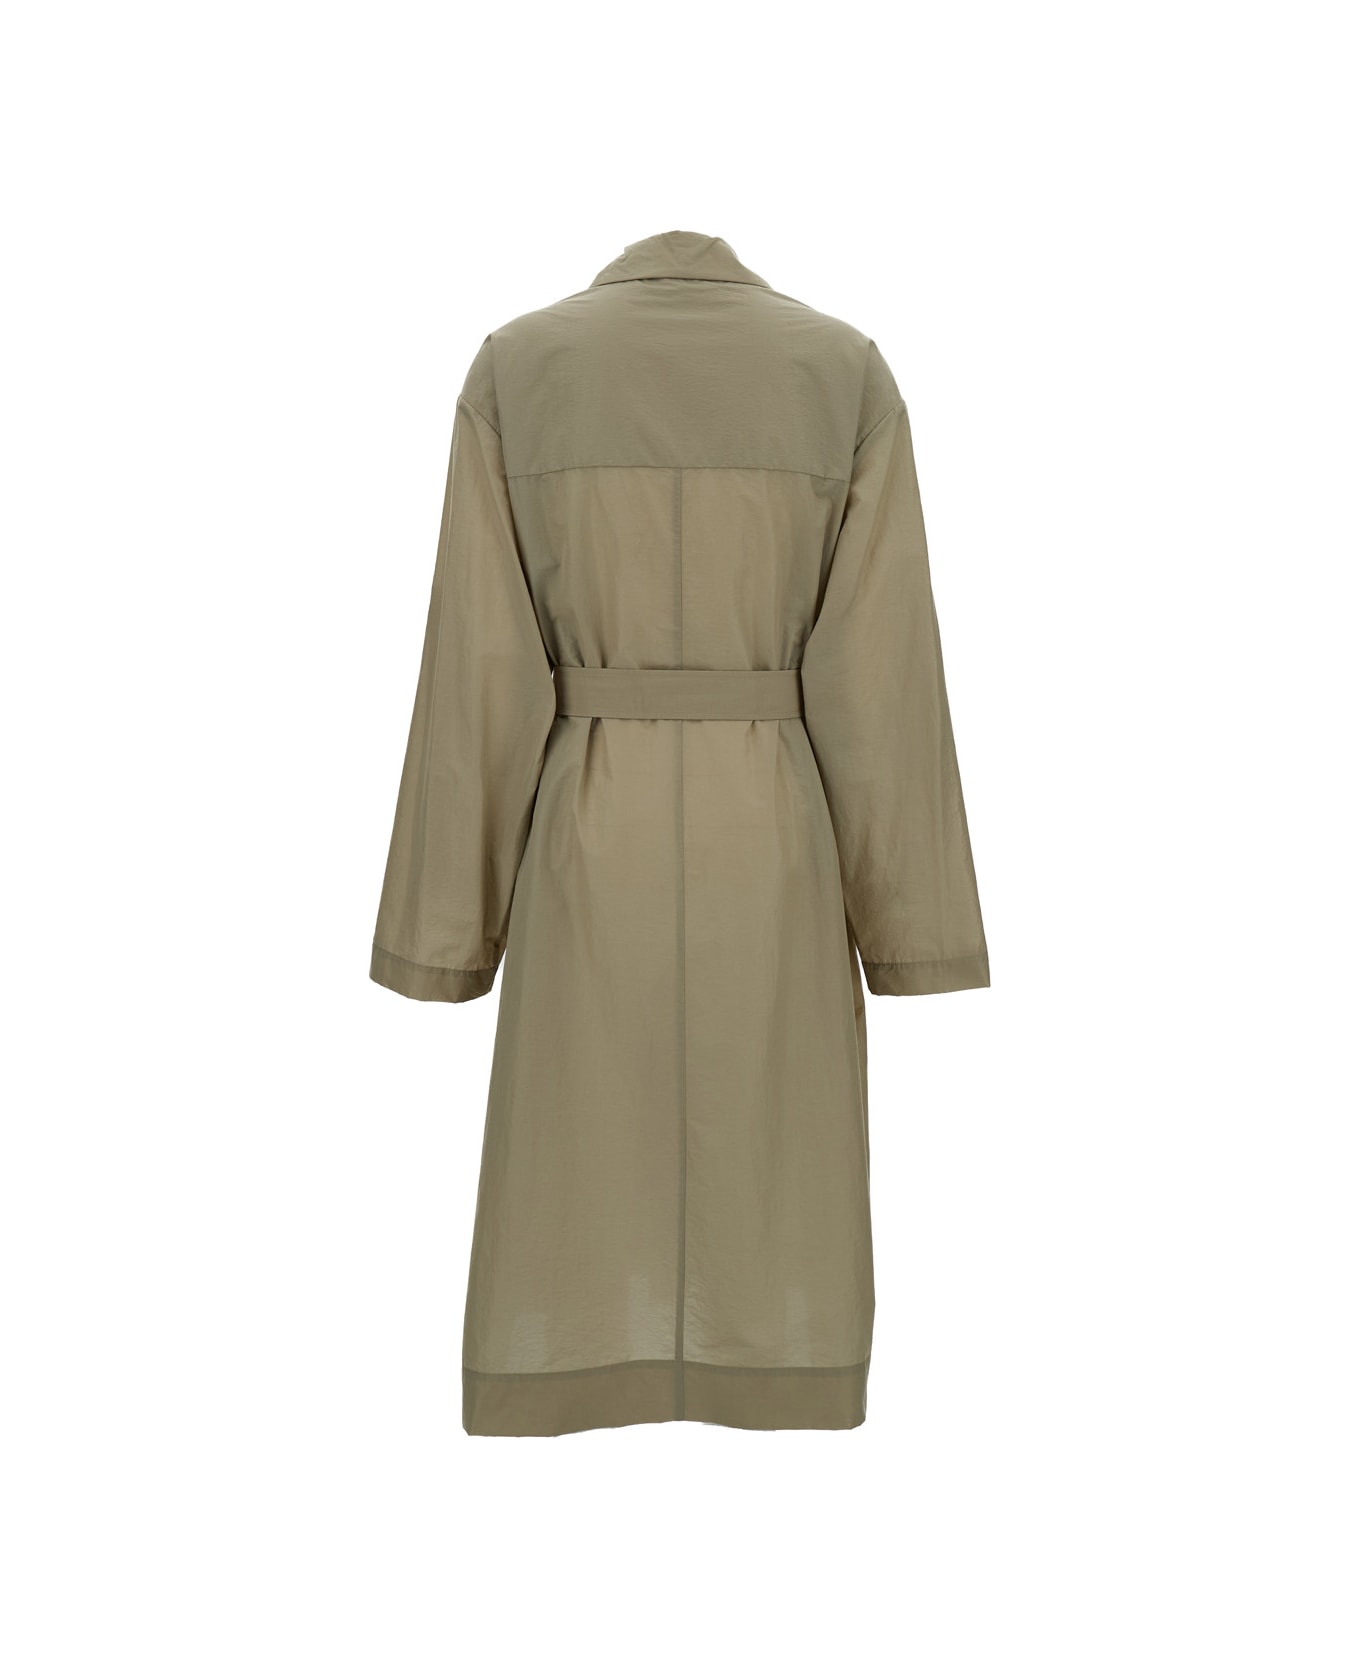 Philosophy di Lorenzo Serafini Olive Green Trench Coat With Buttons In Technical Fabric Woman - Green コート